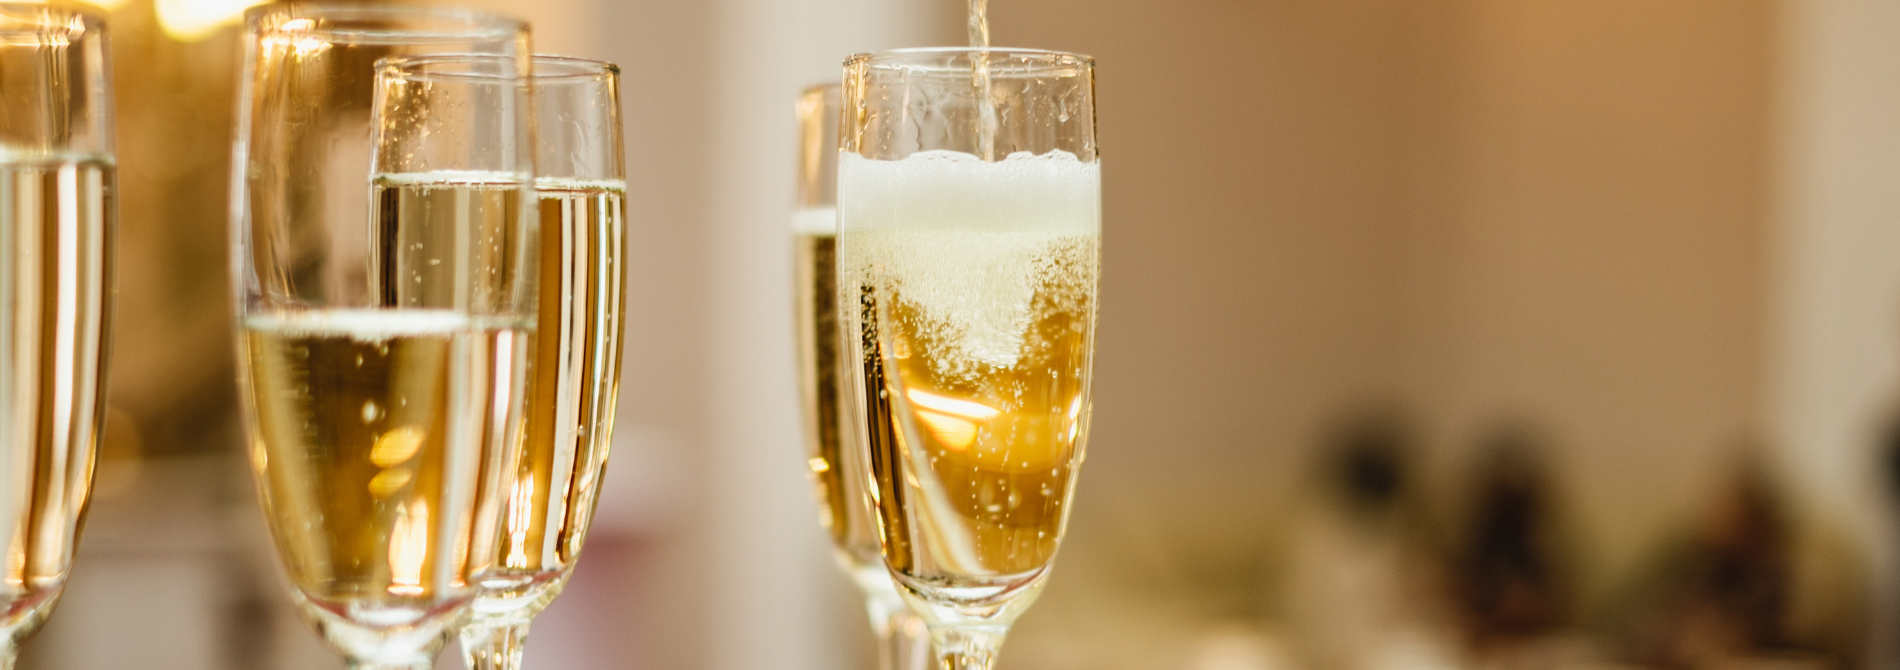 NATIONAL Prosecco DAY: A Prosecco COCKTAIL FOR EVERY OCCASION